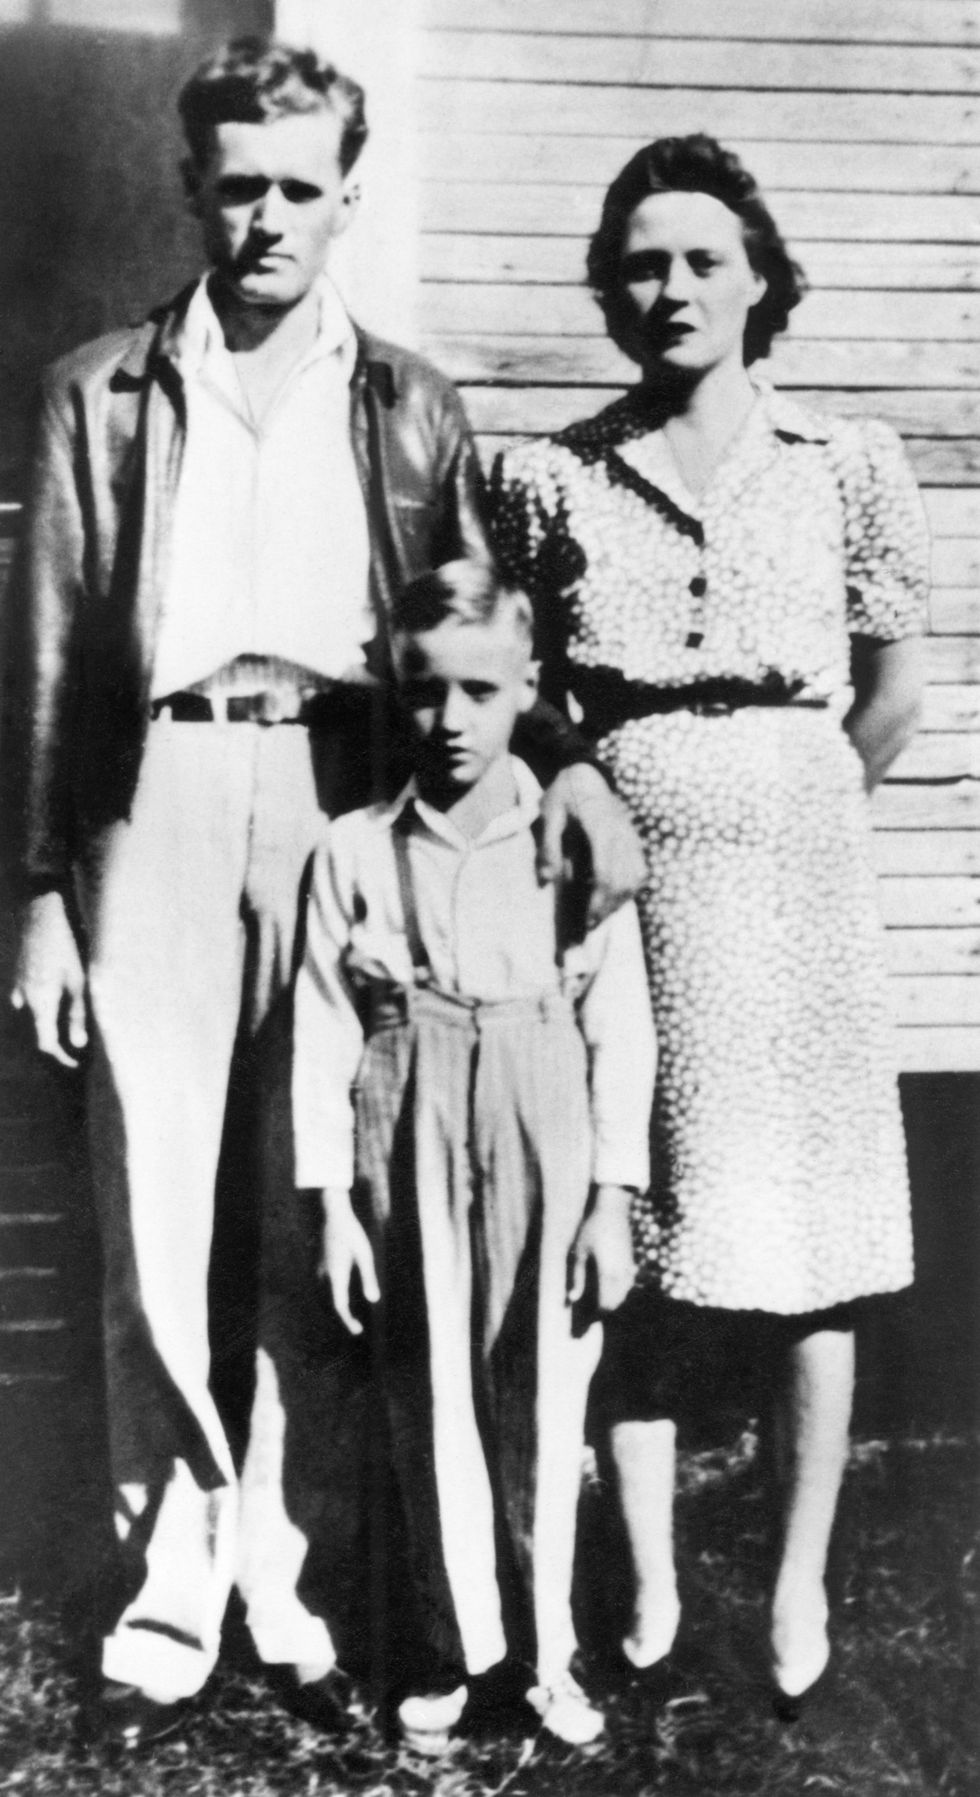 united states   january 01  usa  photo of elvis presley, as a child with his parents   l r vernon presley, elvis presley as child, gladys presley  photo by rbredferns